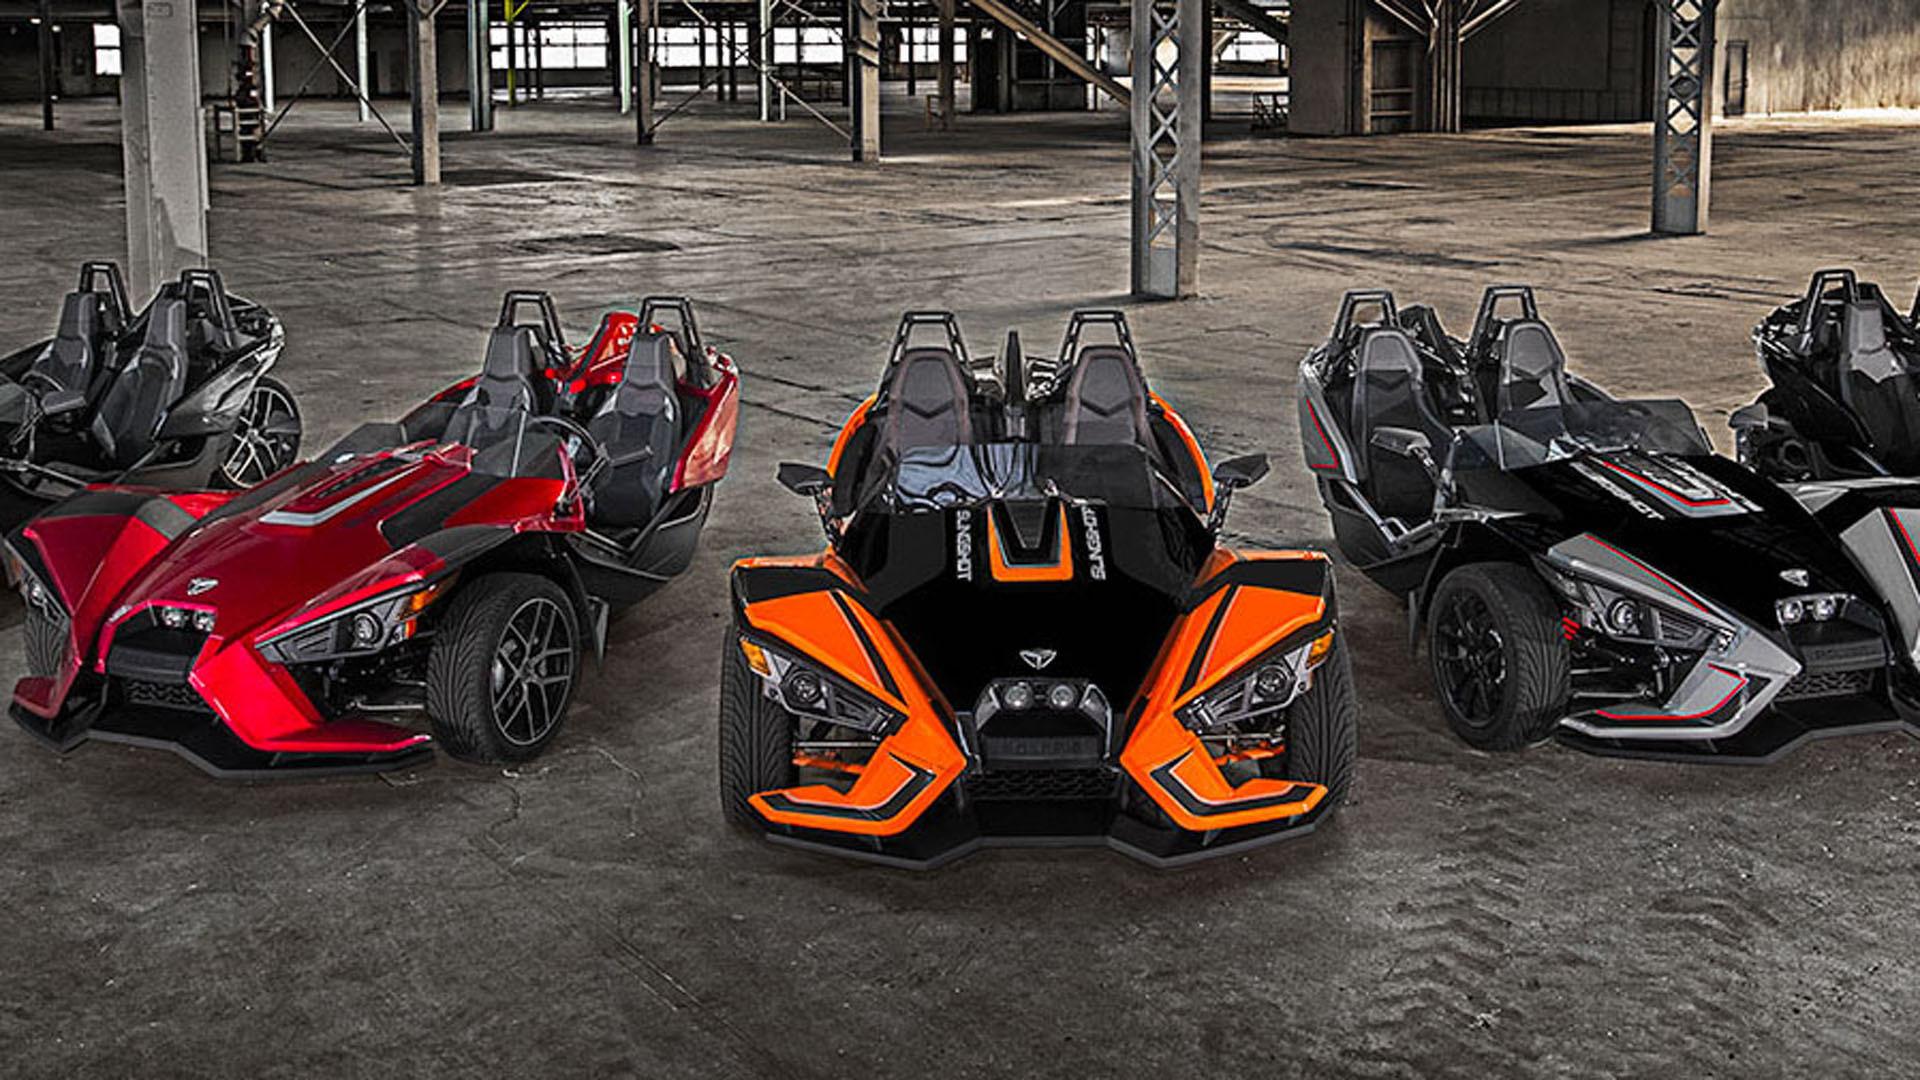 Polaris Slingshot gets luxury trim and removable roof